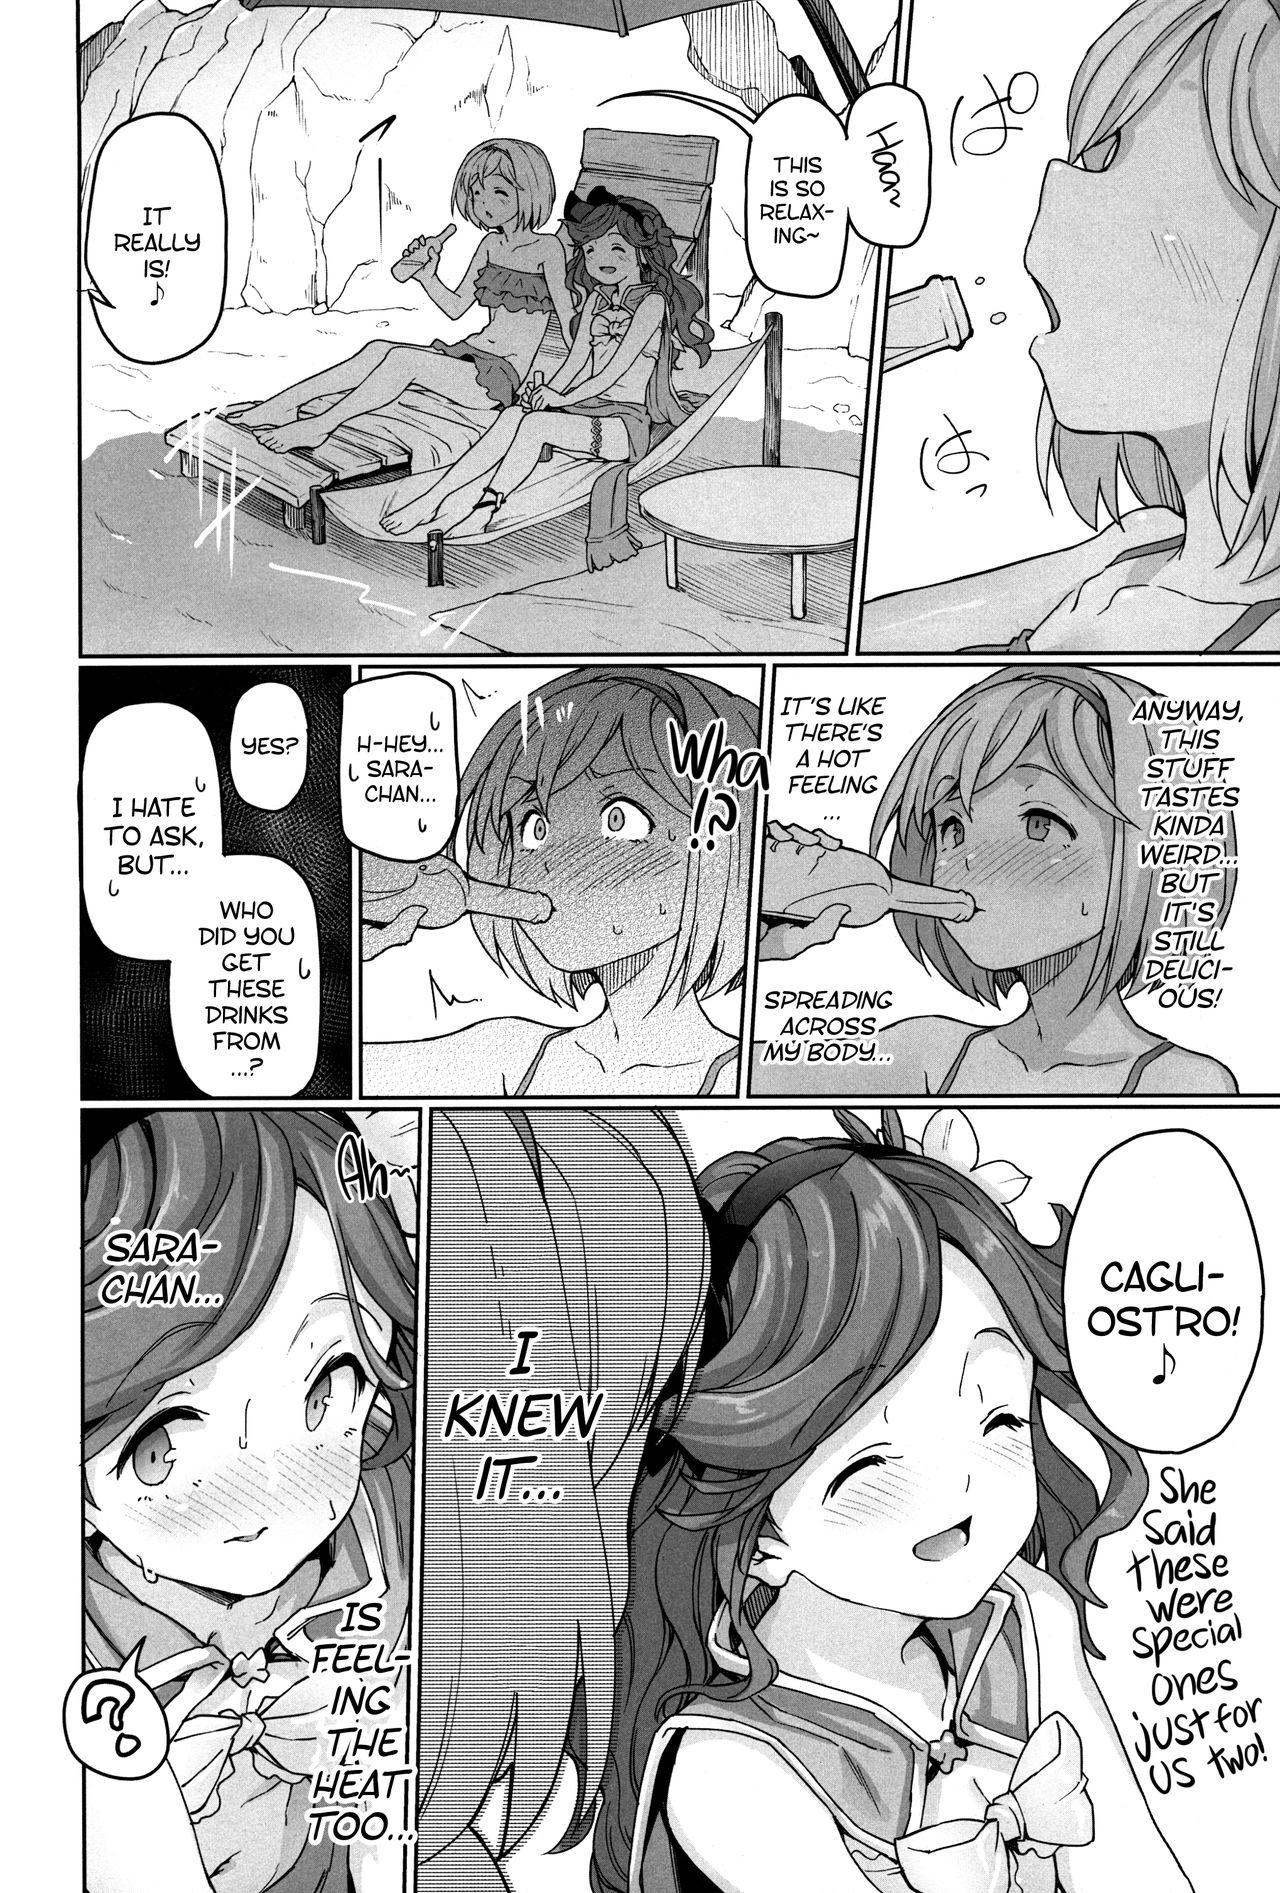 Oral Porn Sunagami no Komachi Angel? | A Town Beauty Angel of the Dunes? - Granblue fantasy Dutch - Page 5